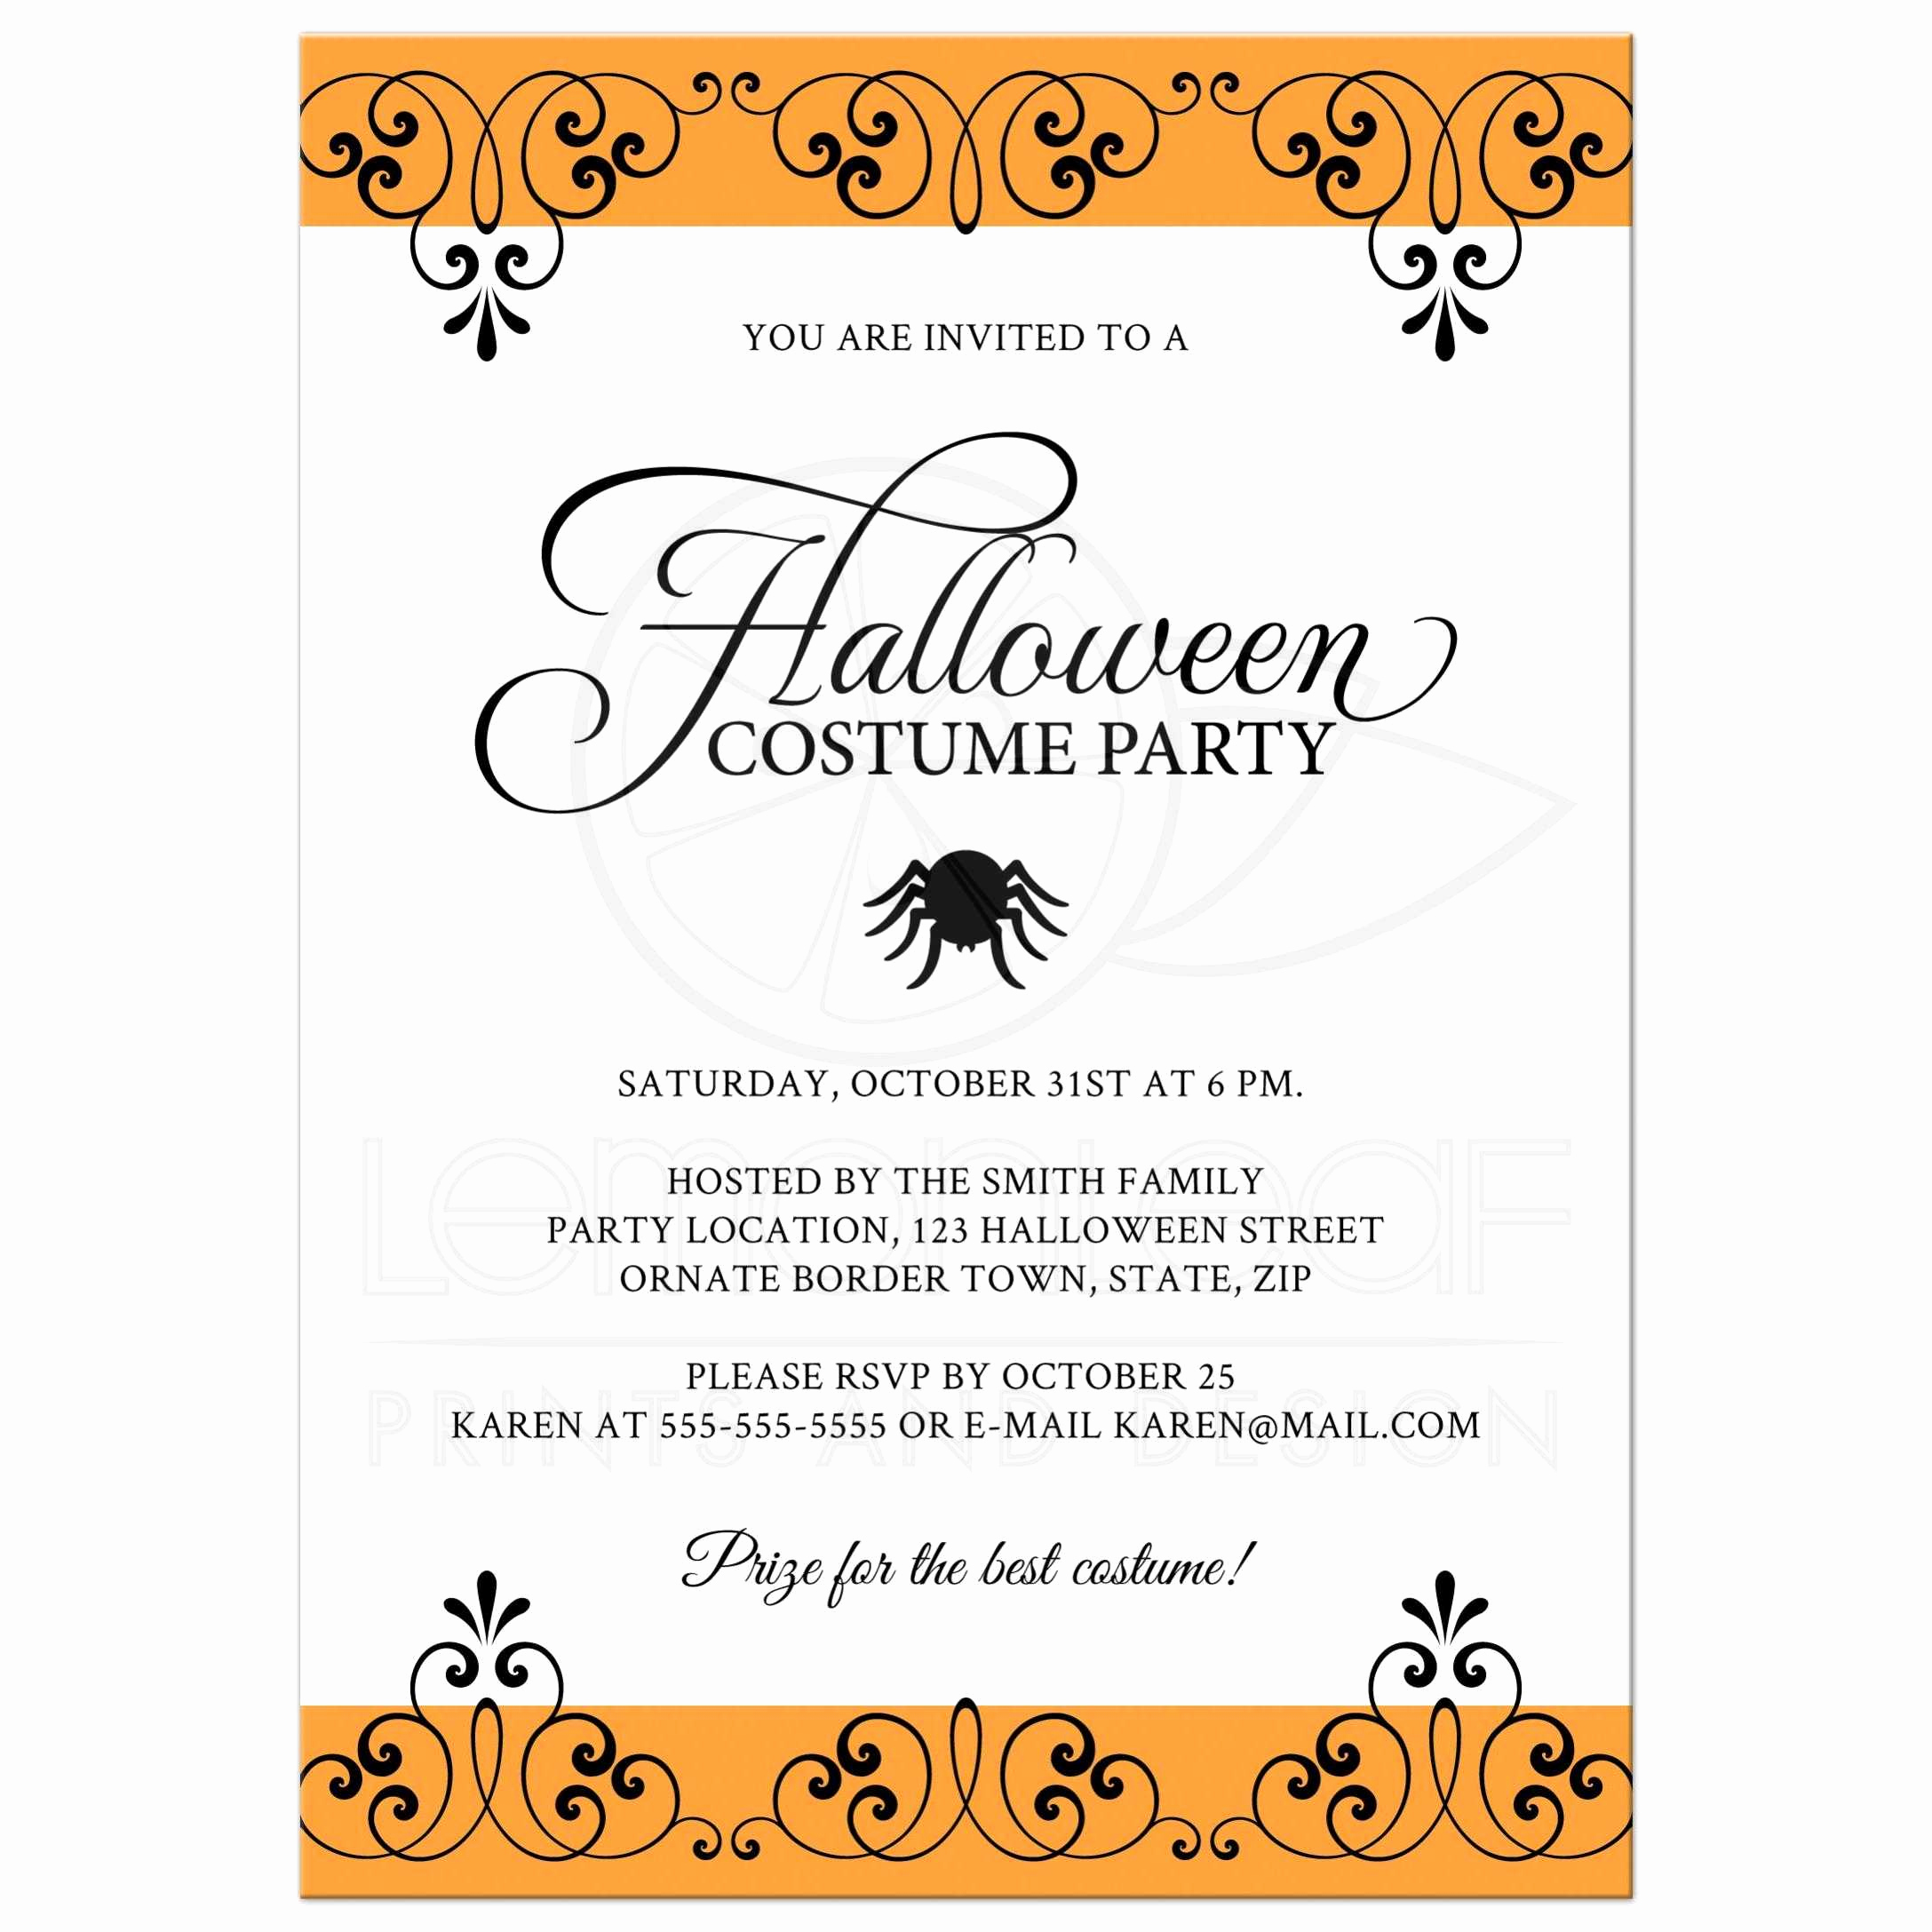 Costume Party Invitation Wording Best Of Halloween Costume Party Invitation with ornate Black and